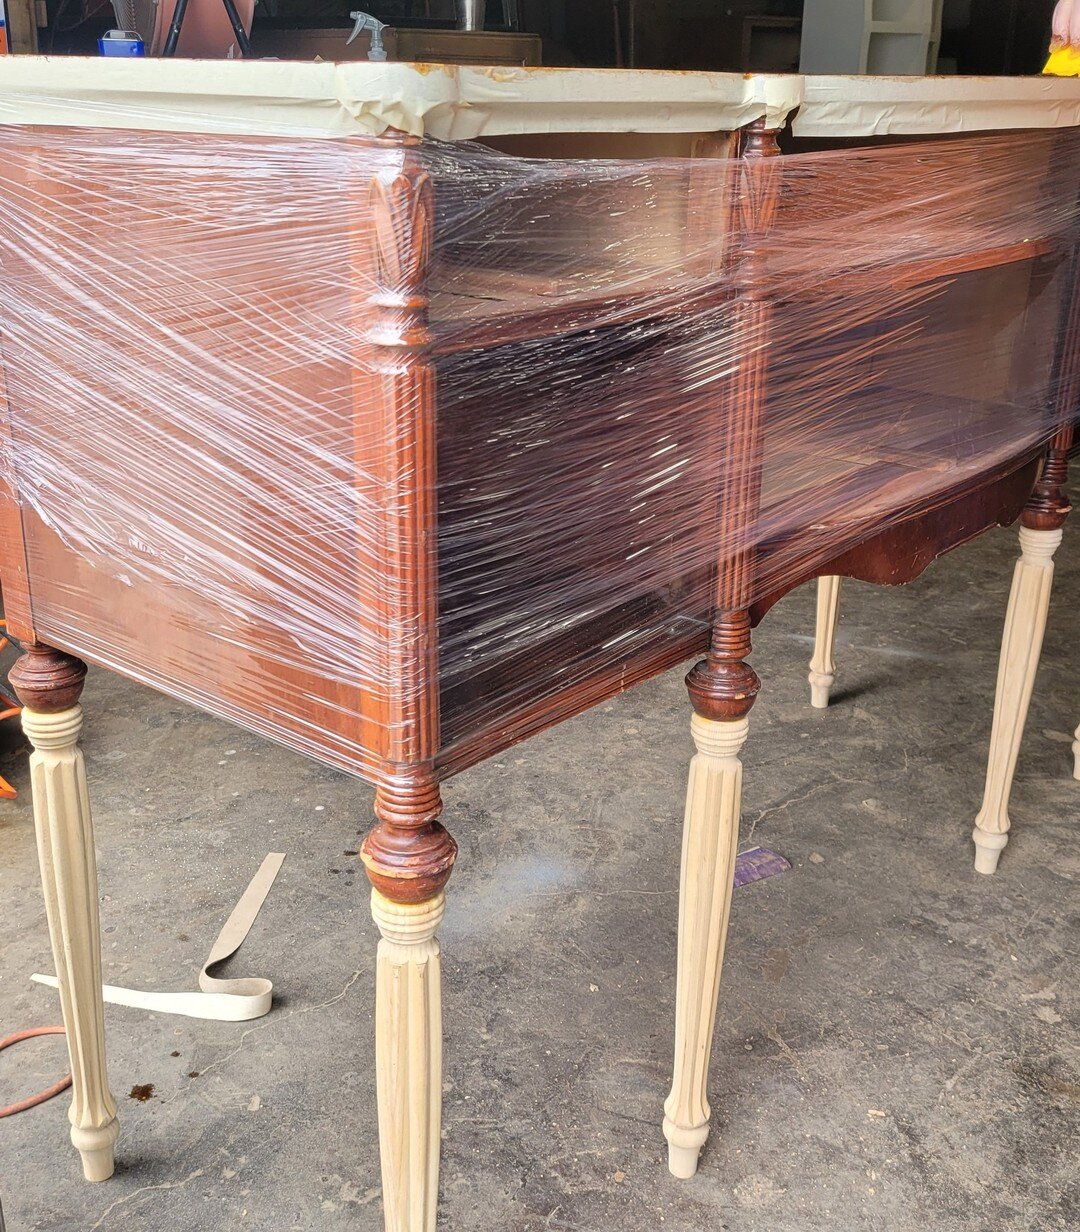 She's got legs!

Why would anyone cut the legs off a mahogany sideboard??? These are the questions we ask ourselves as we bring landfill-bound pieces back to life. This little lady got some new legs and will be color matched for a seamless finish.

#